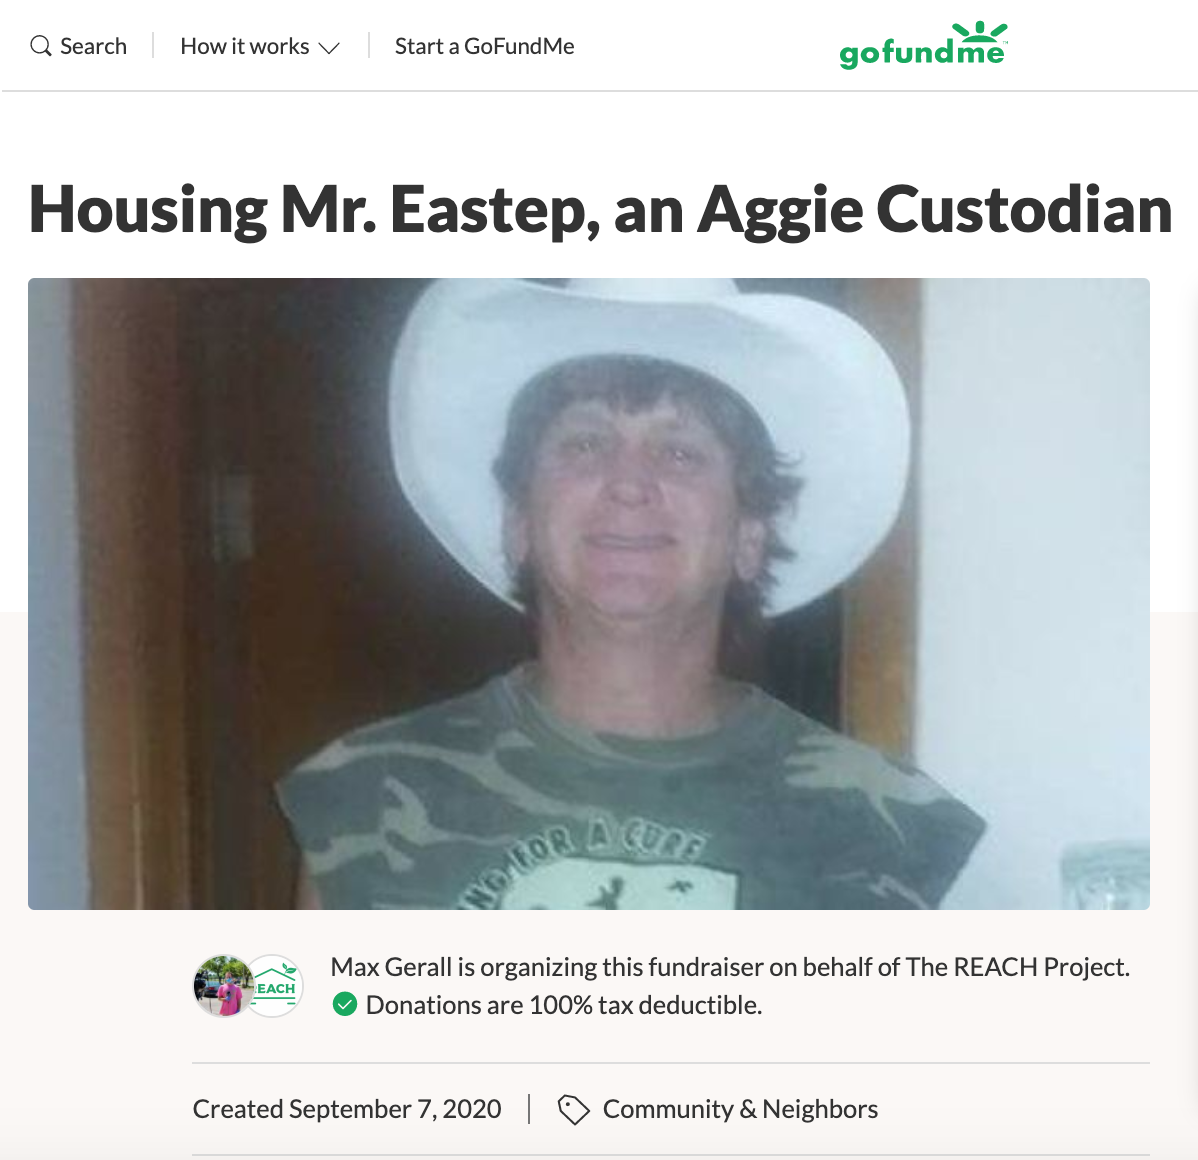 A GoFundMe was started by the REACH Project to raise money for Texas A&M custodian Doug Eastep’s living expenses.